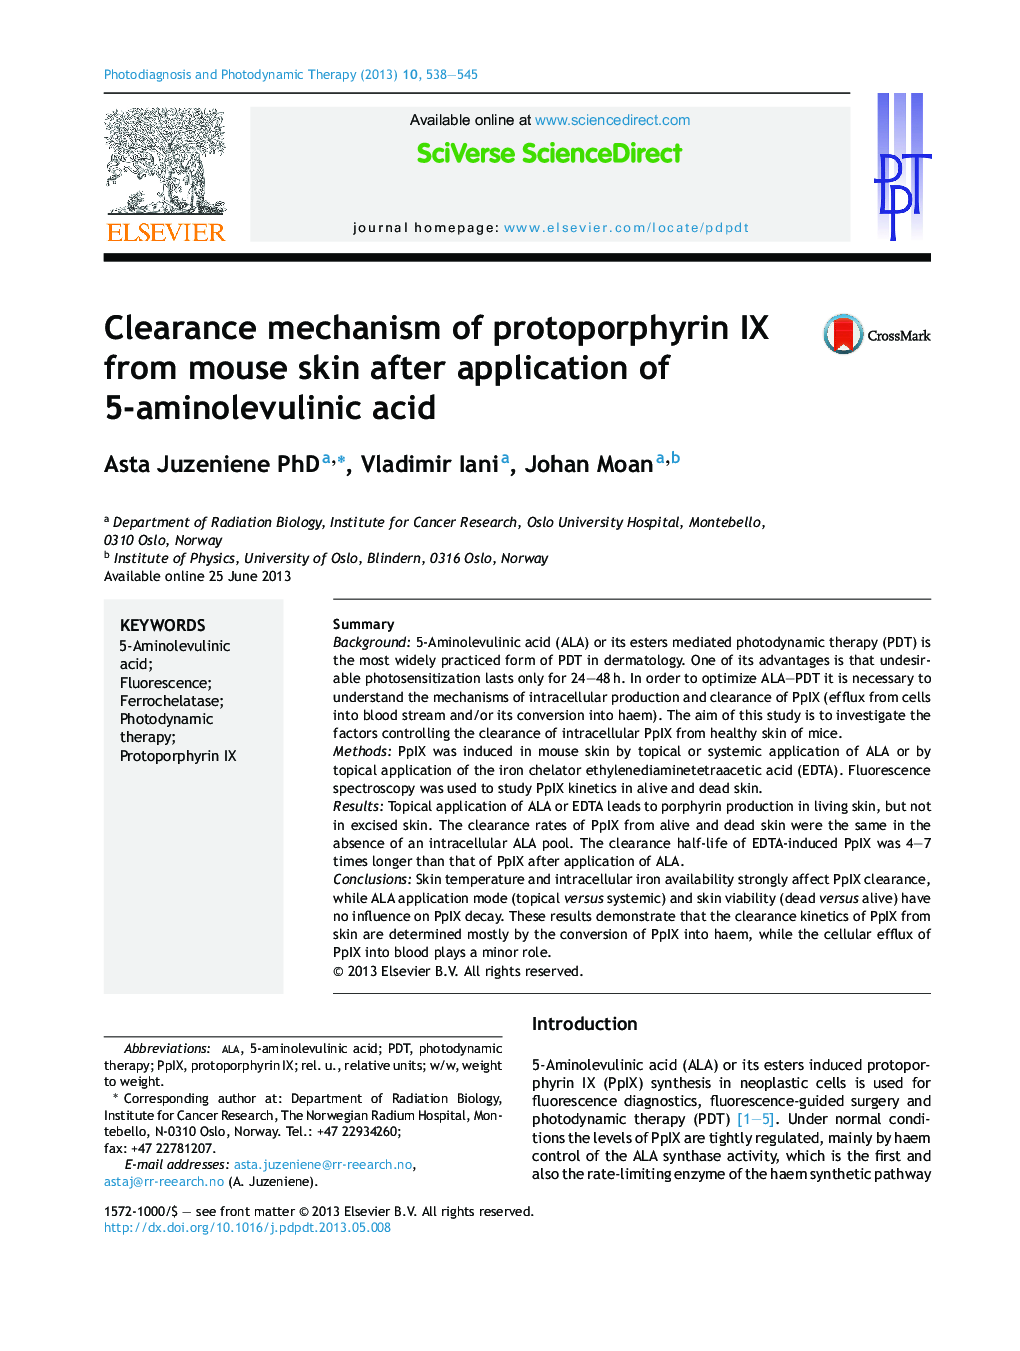 Clearance mechanism of protoporphyrin IX from mouse skin after application of 5-aminolevulinic acid